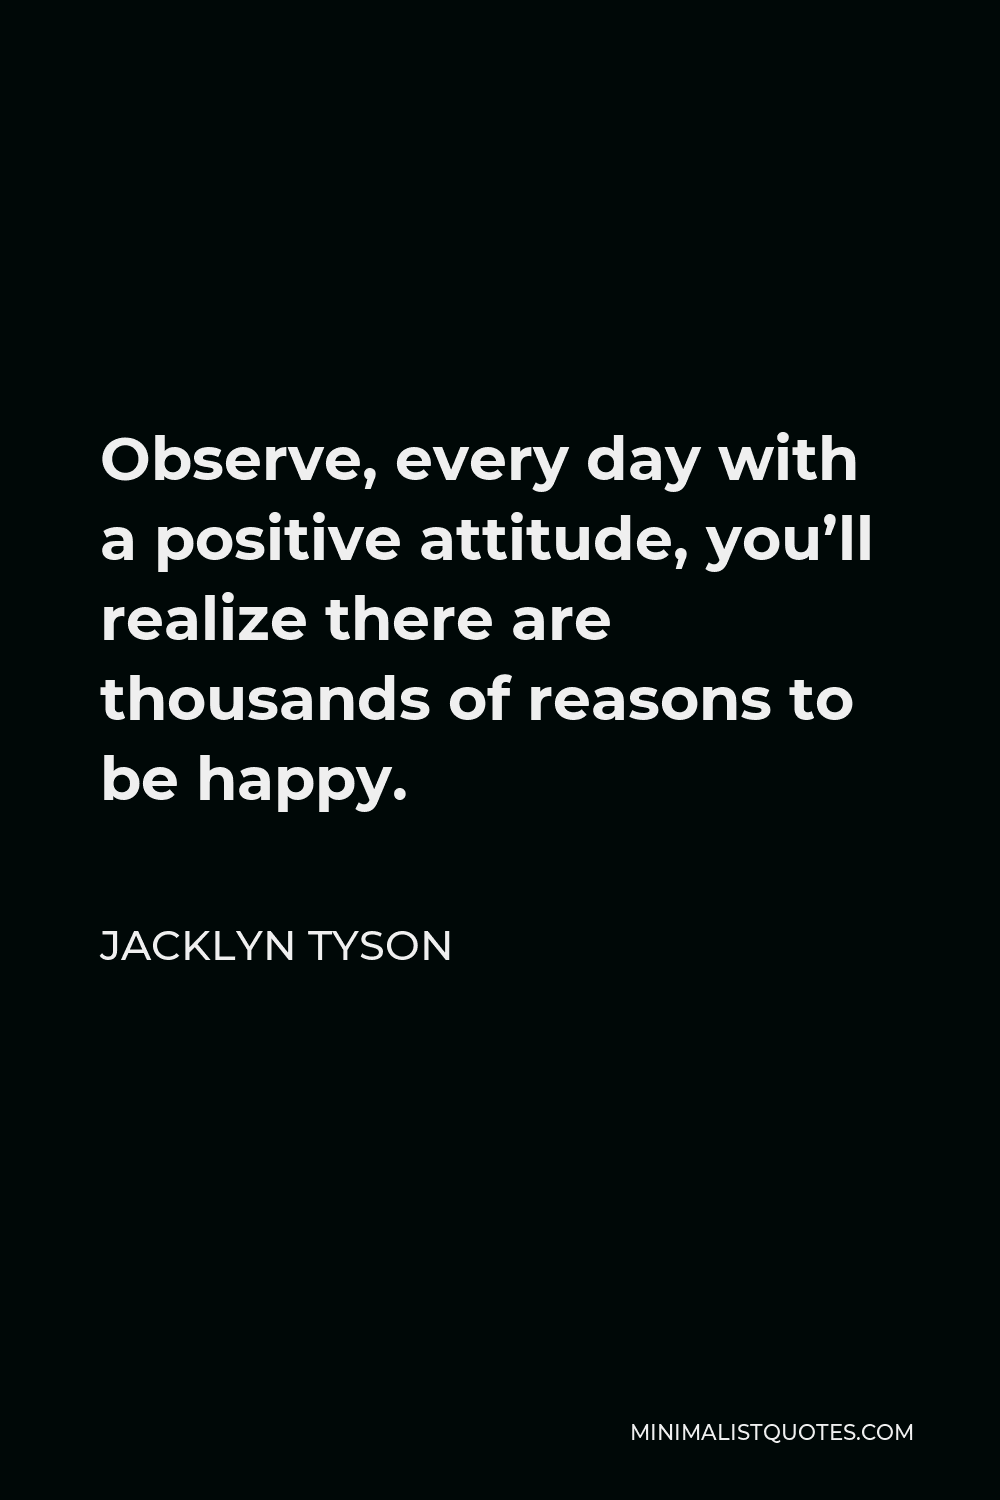 Jacklyn Tyson Quote - Observe, every day with a positive attitude, you’ll realize there are thousands of reasons to be happy.